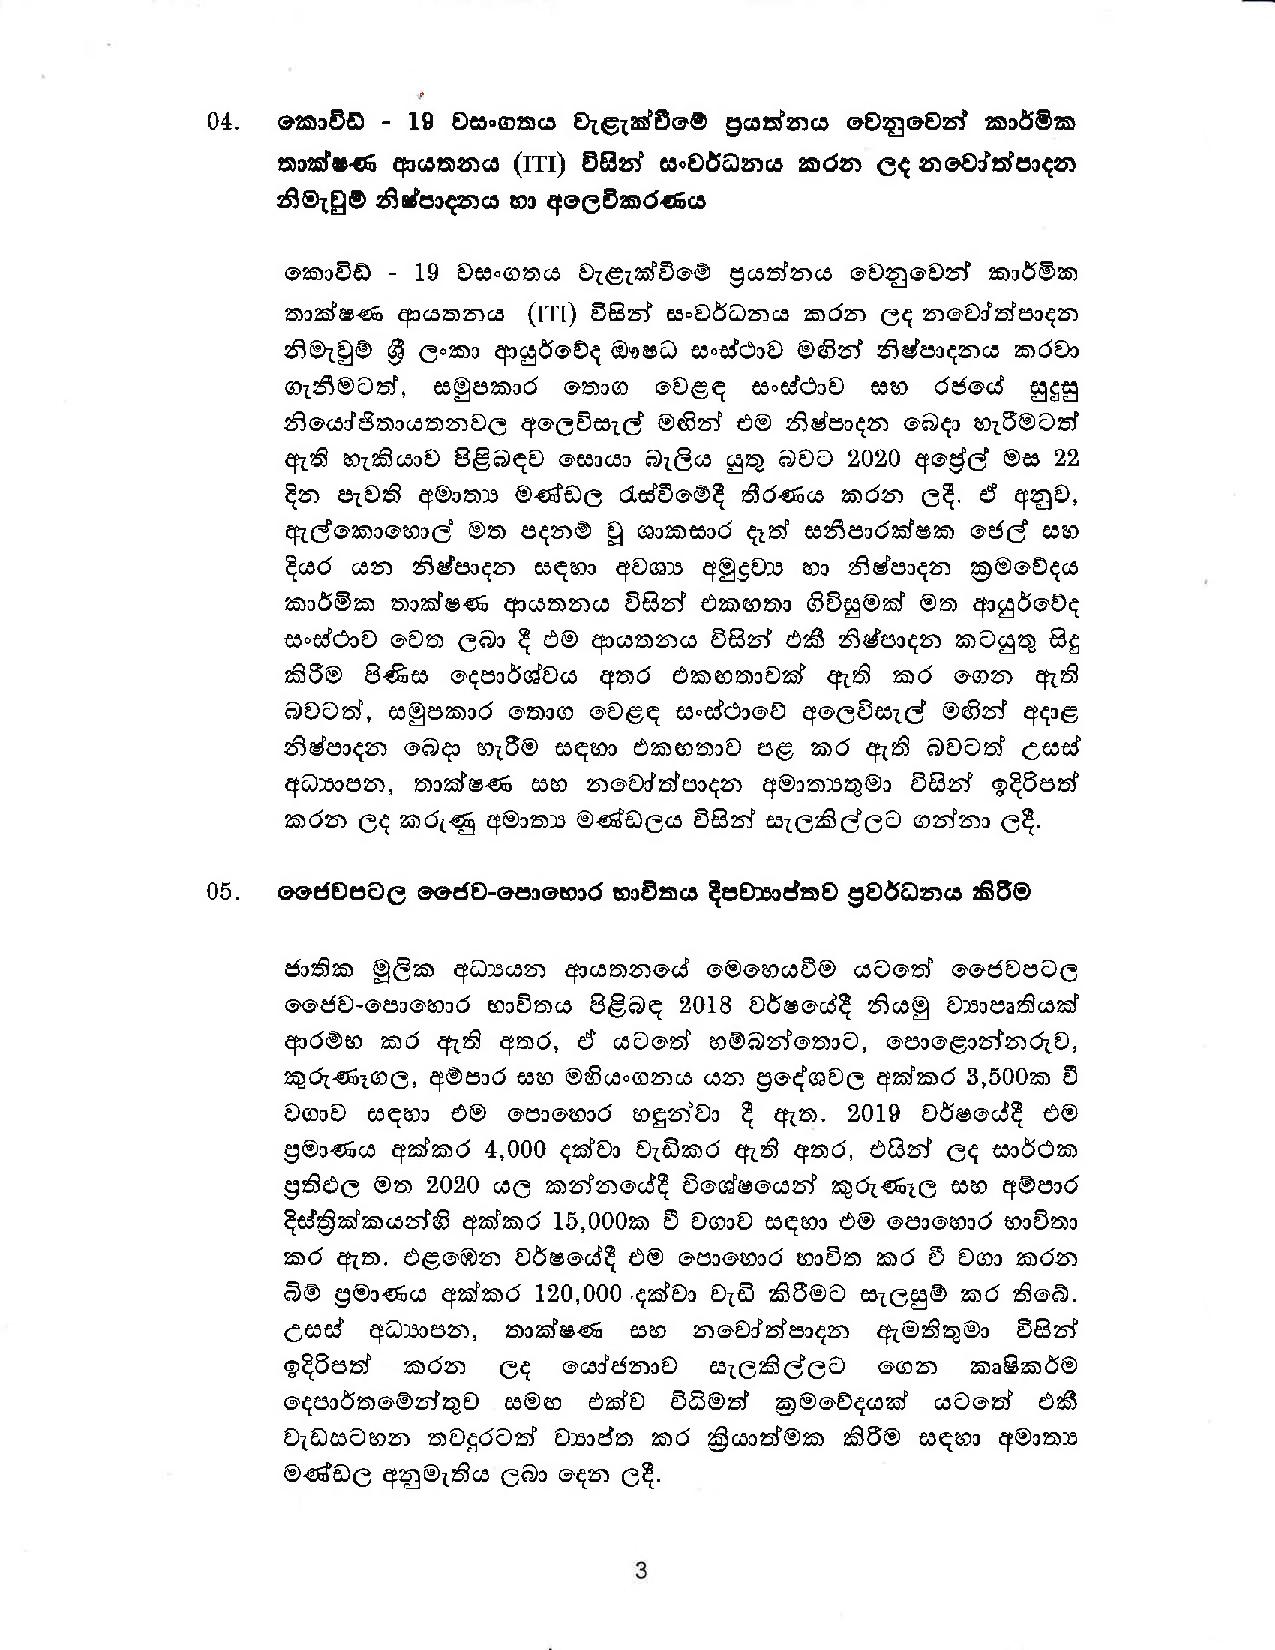 Cabinet Decision on 22.07.2020 page 003